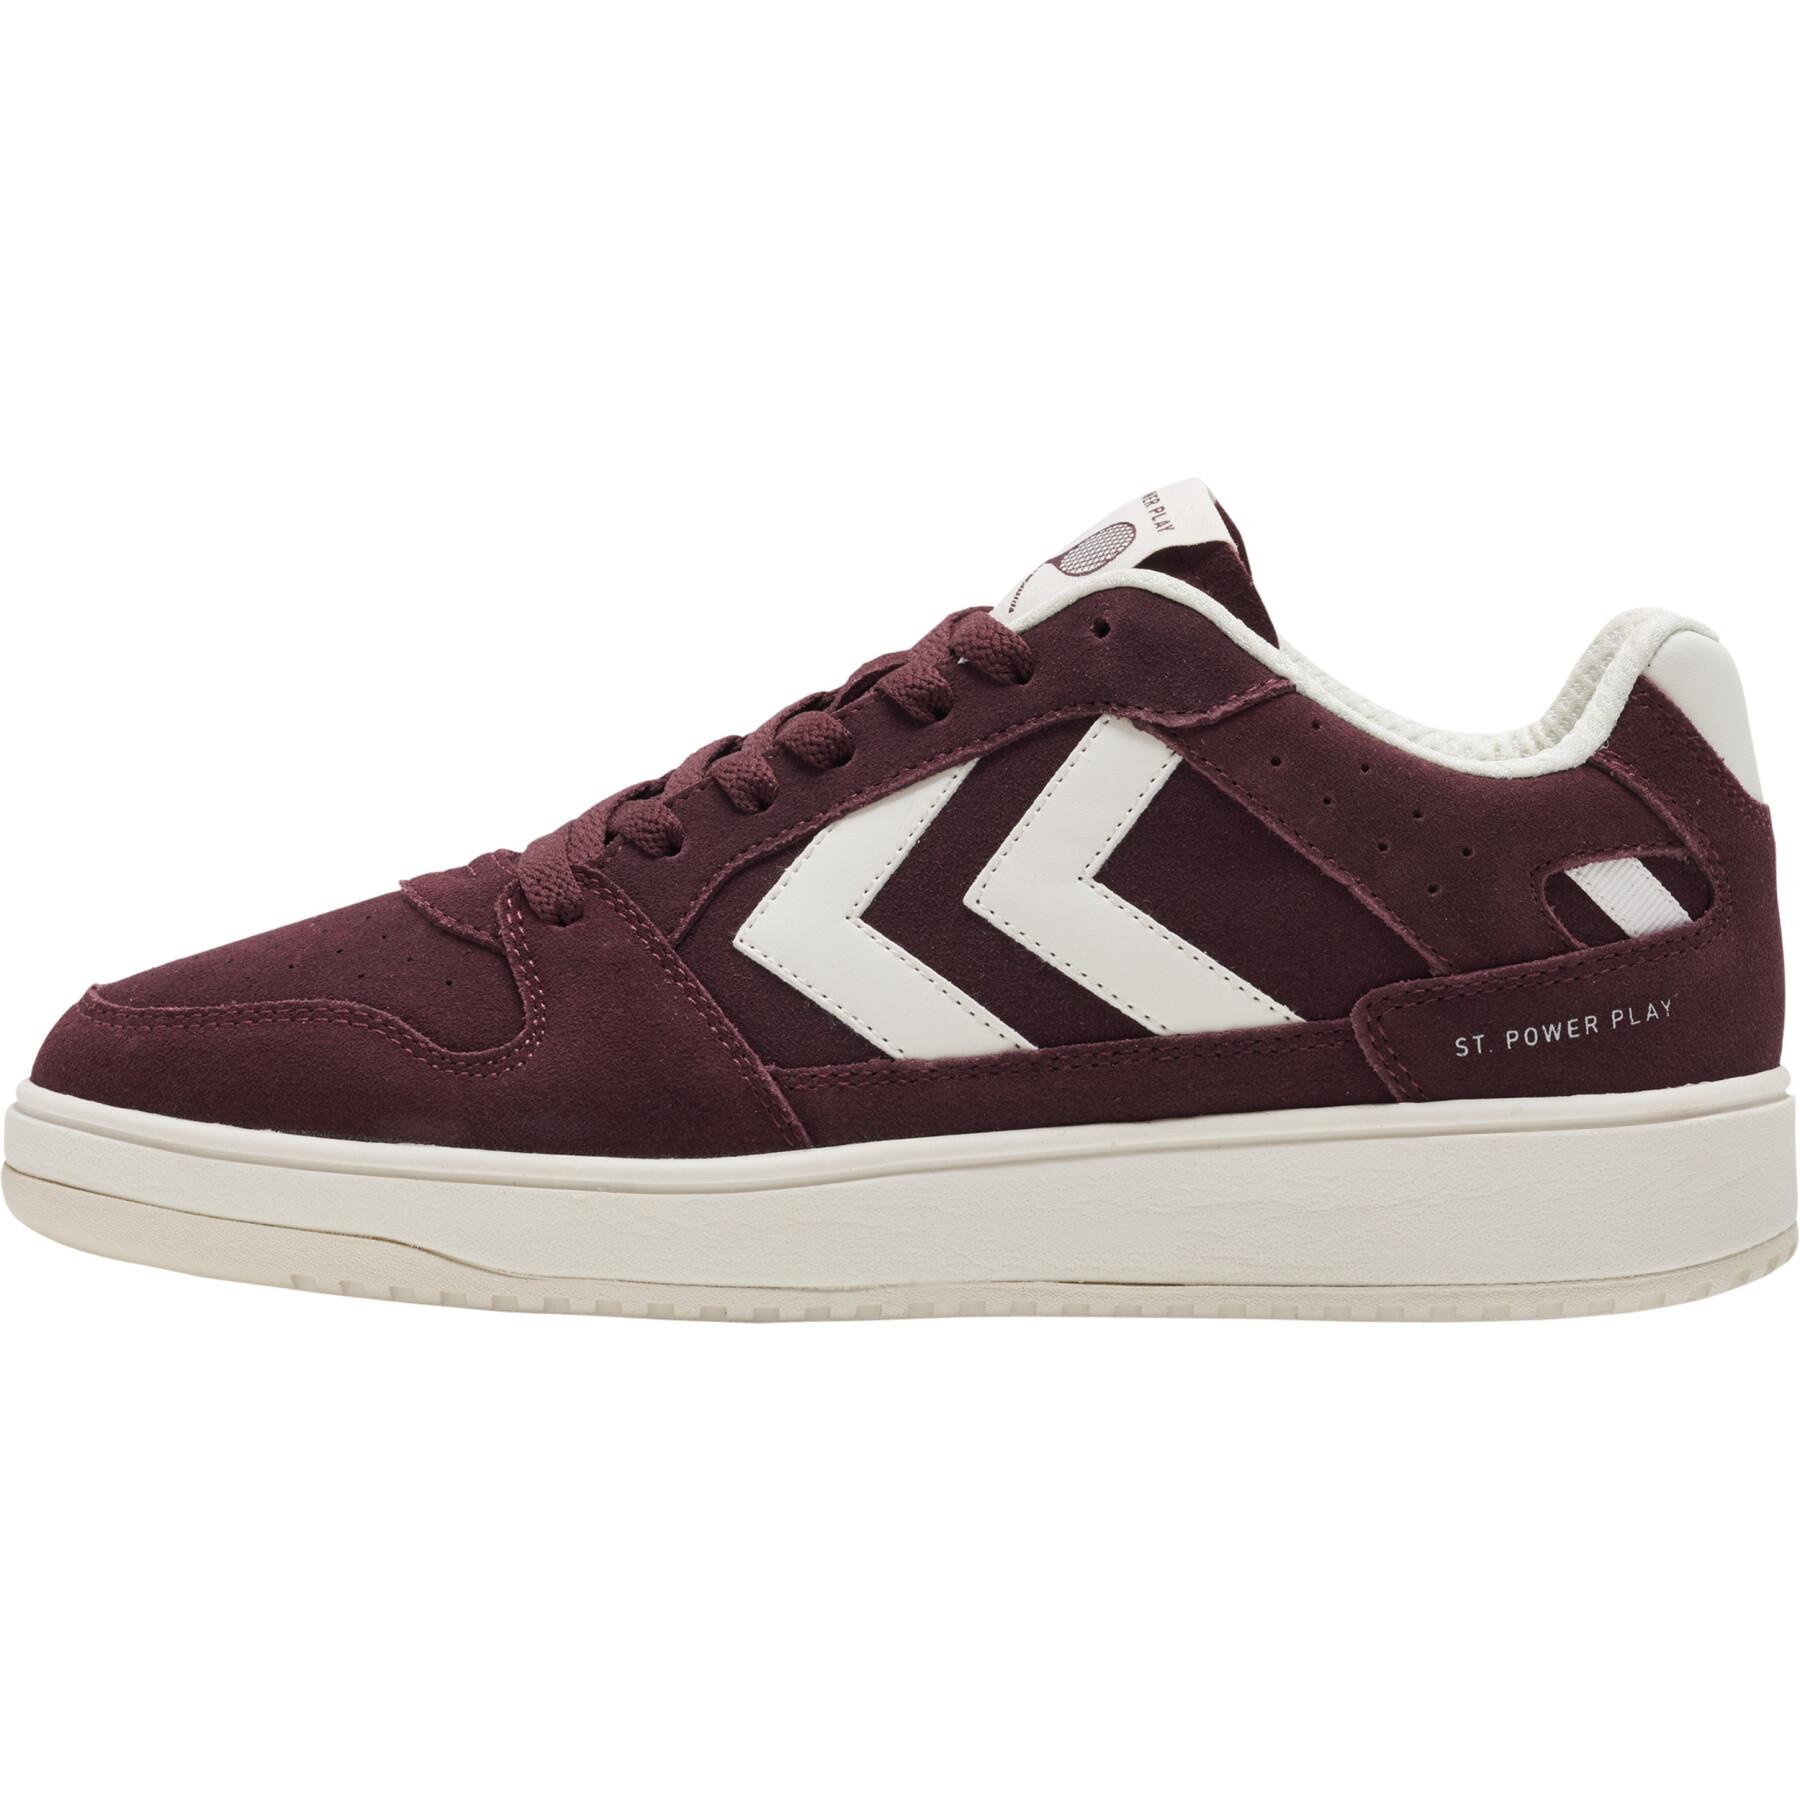 Sneakers Hummel St. Play Lifestyle Suede Hummel - Brands - Power 